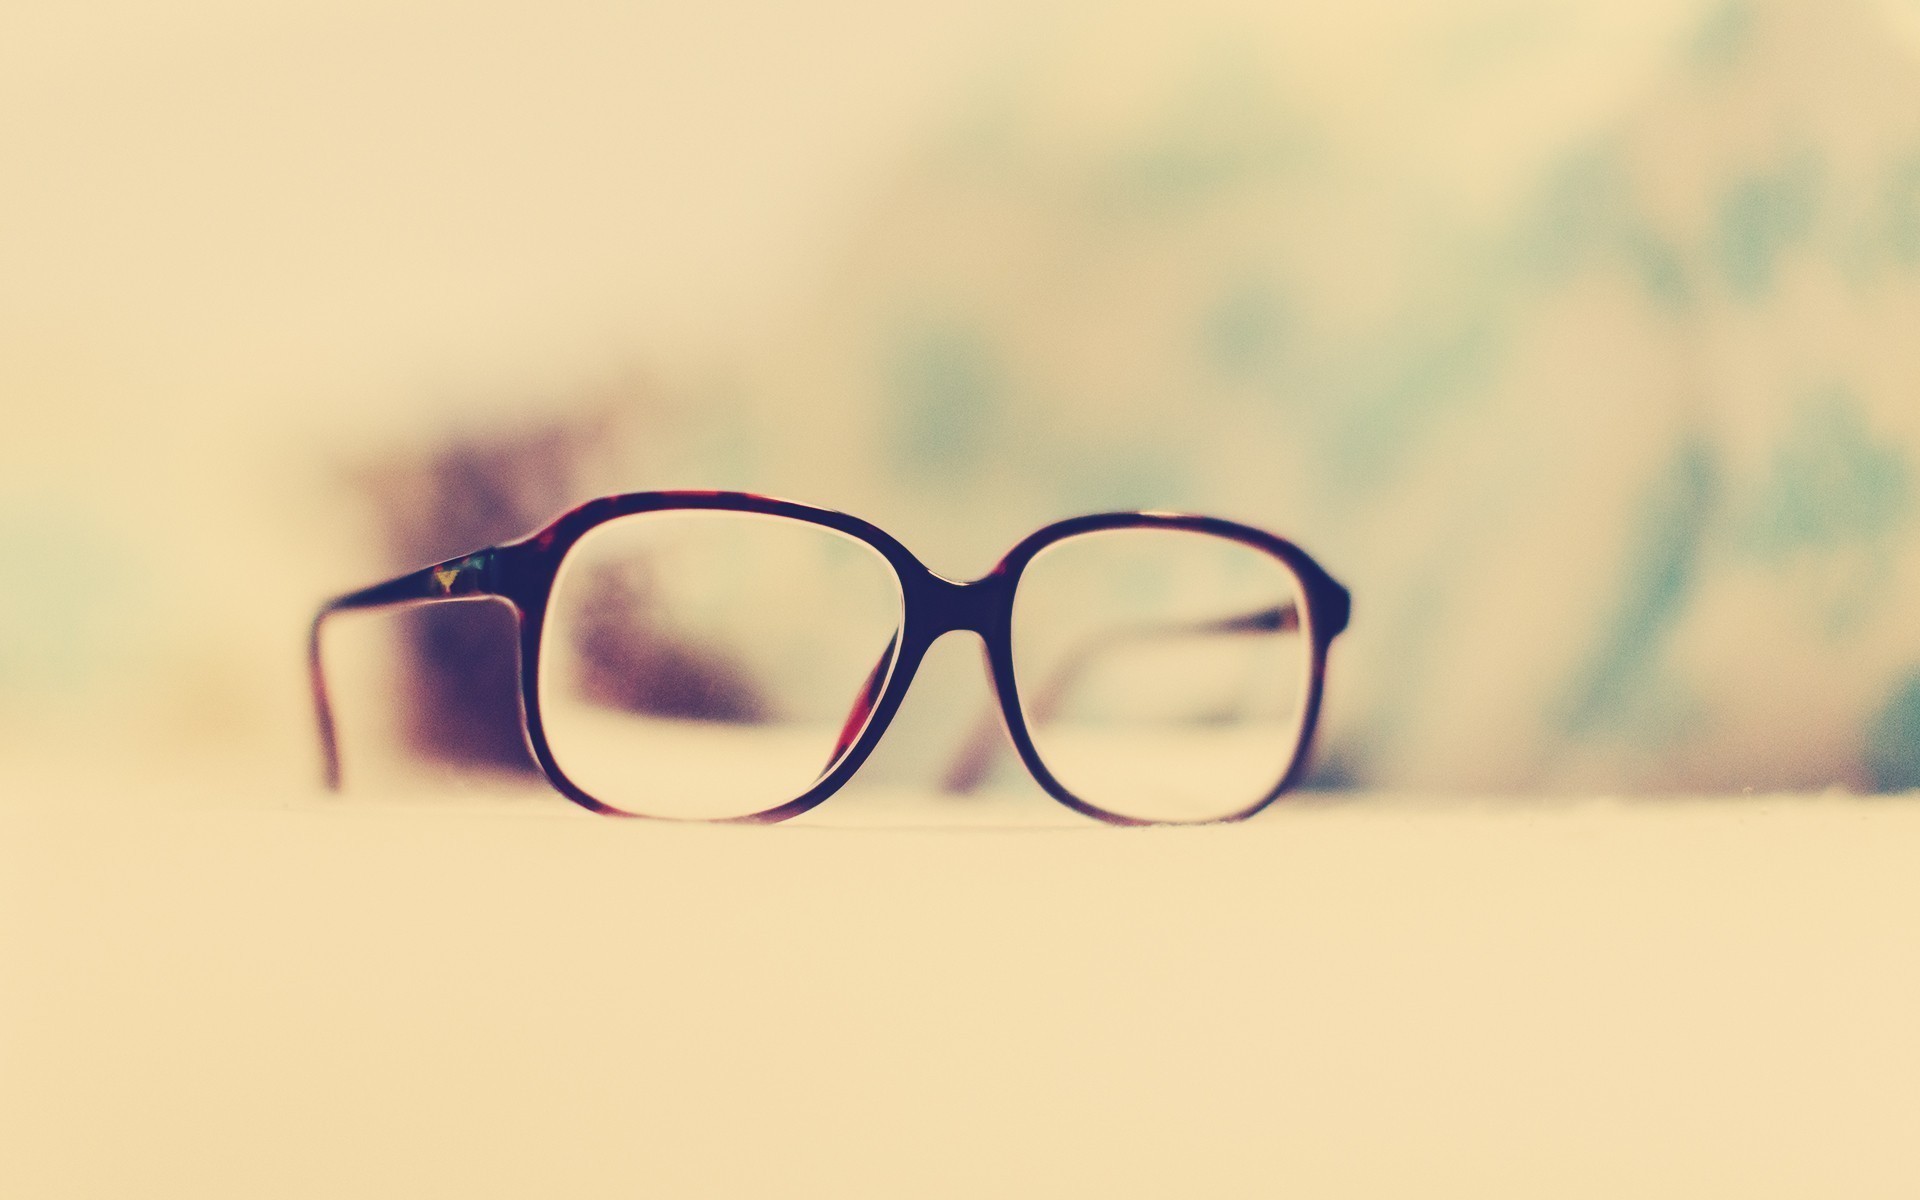 photography, Glasses Wallpaper